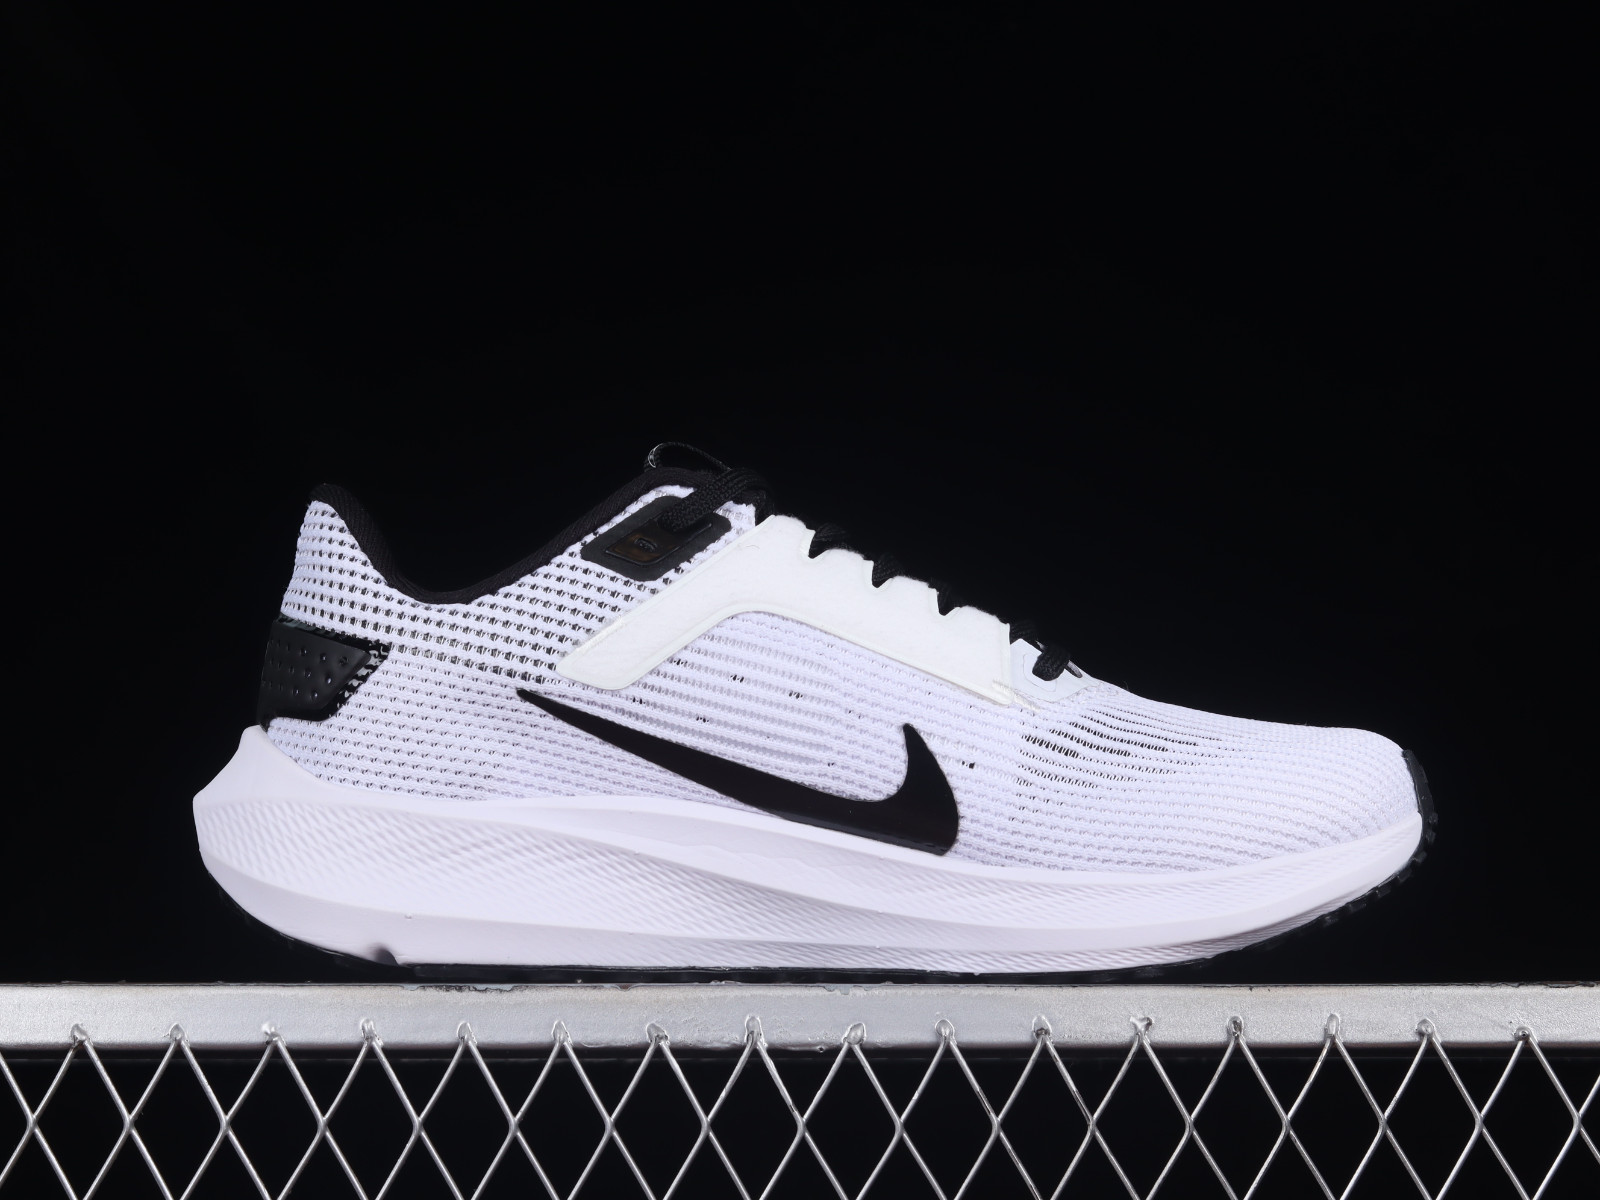 Seem Accusation Literacy Nike Air Zoom Pegasus 40 White Black DV3854 - MultiscaleconsultingShops -  nike air thin sole sneakers shoes sale - 102